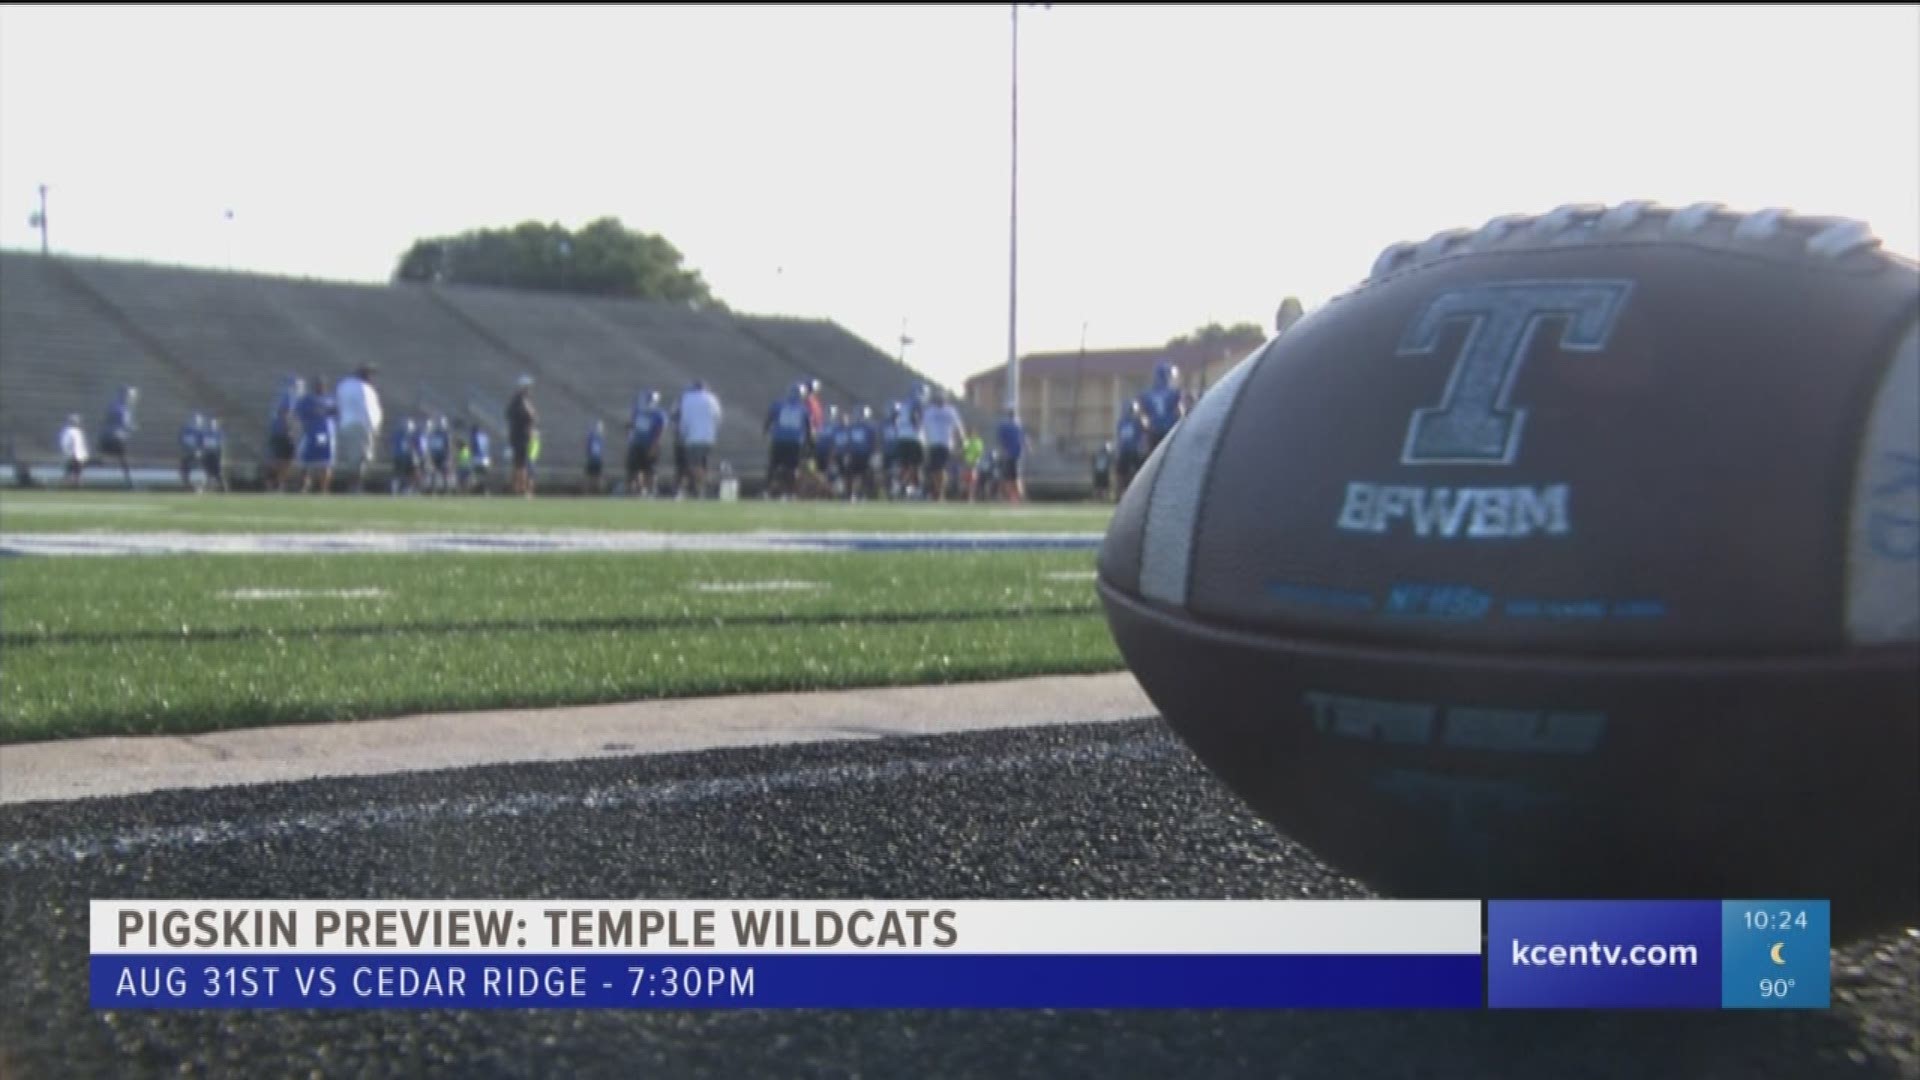 Pigskin Preview: Temple Wildcats